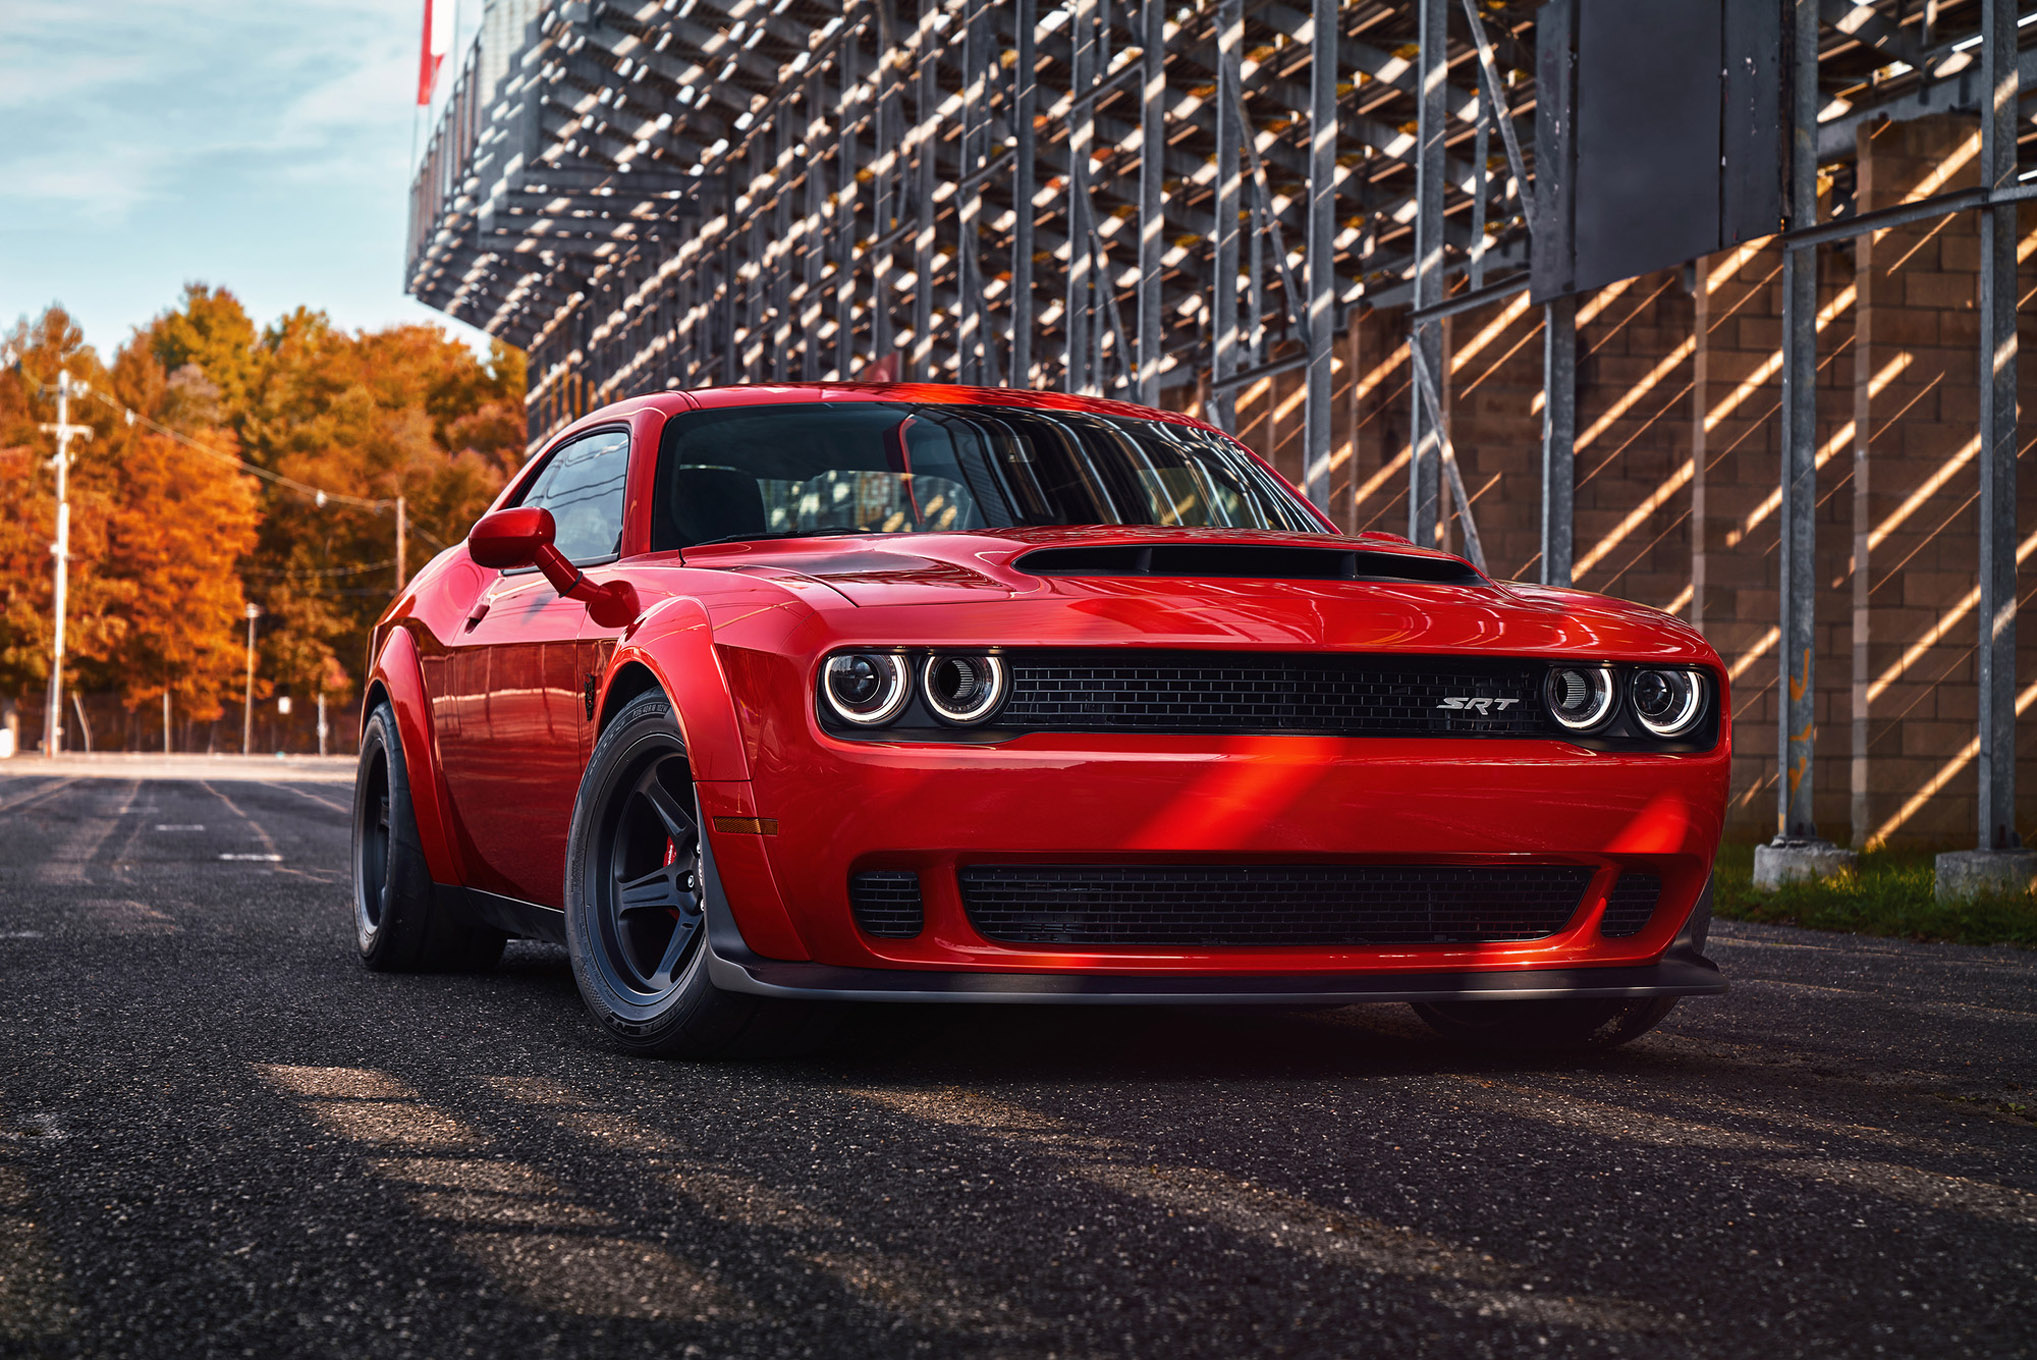 146 Dodge Challenger HD Wallpapers Background Images   Wallpaper